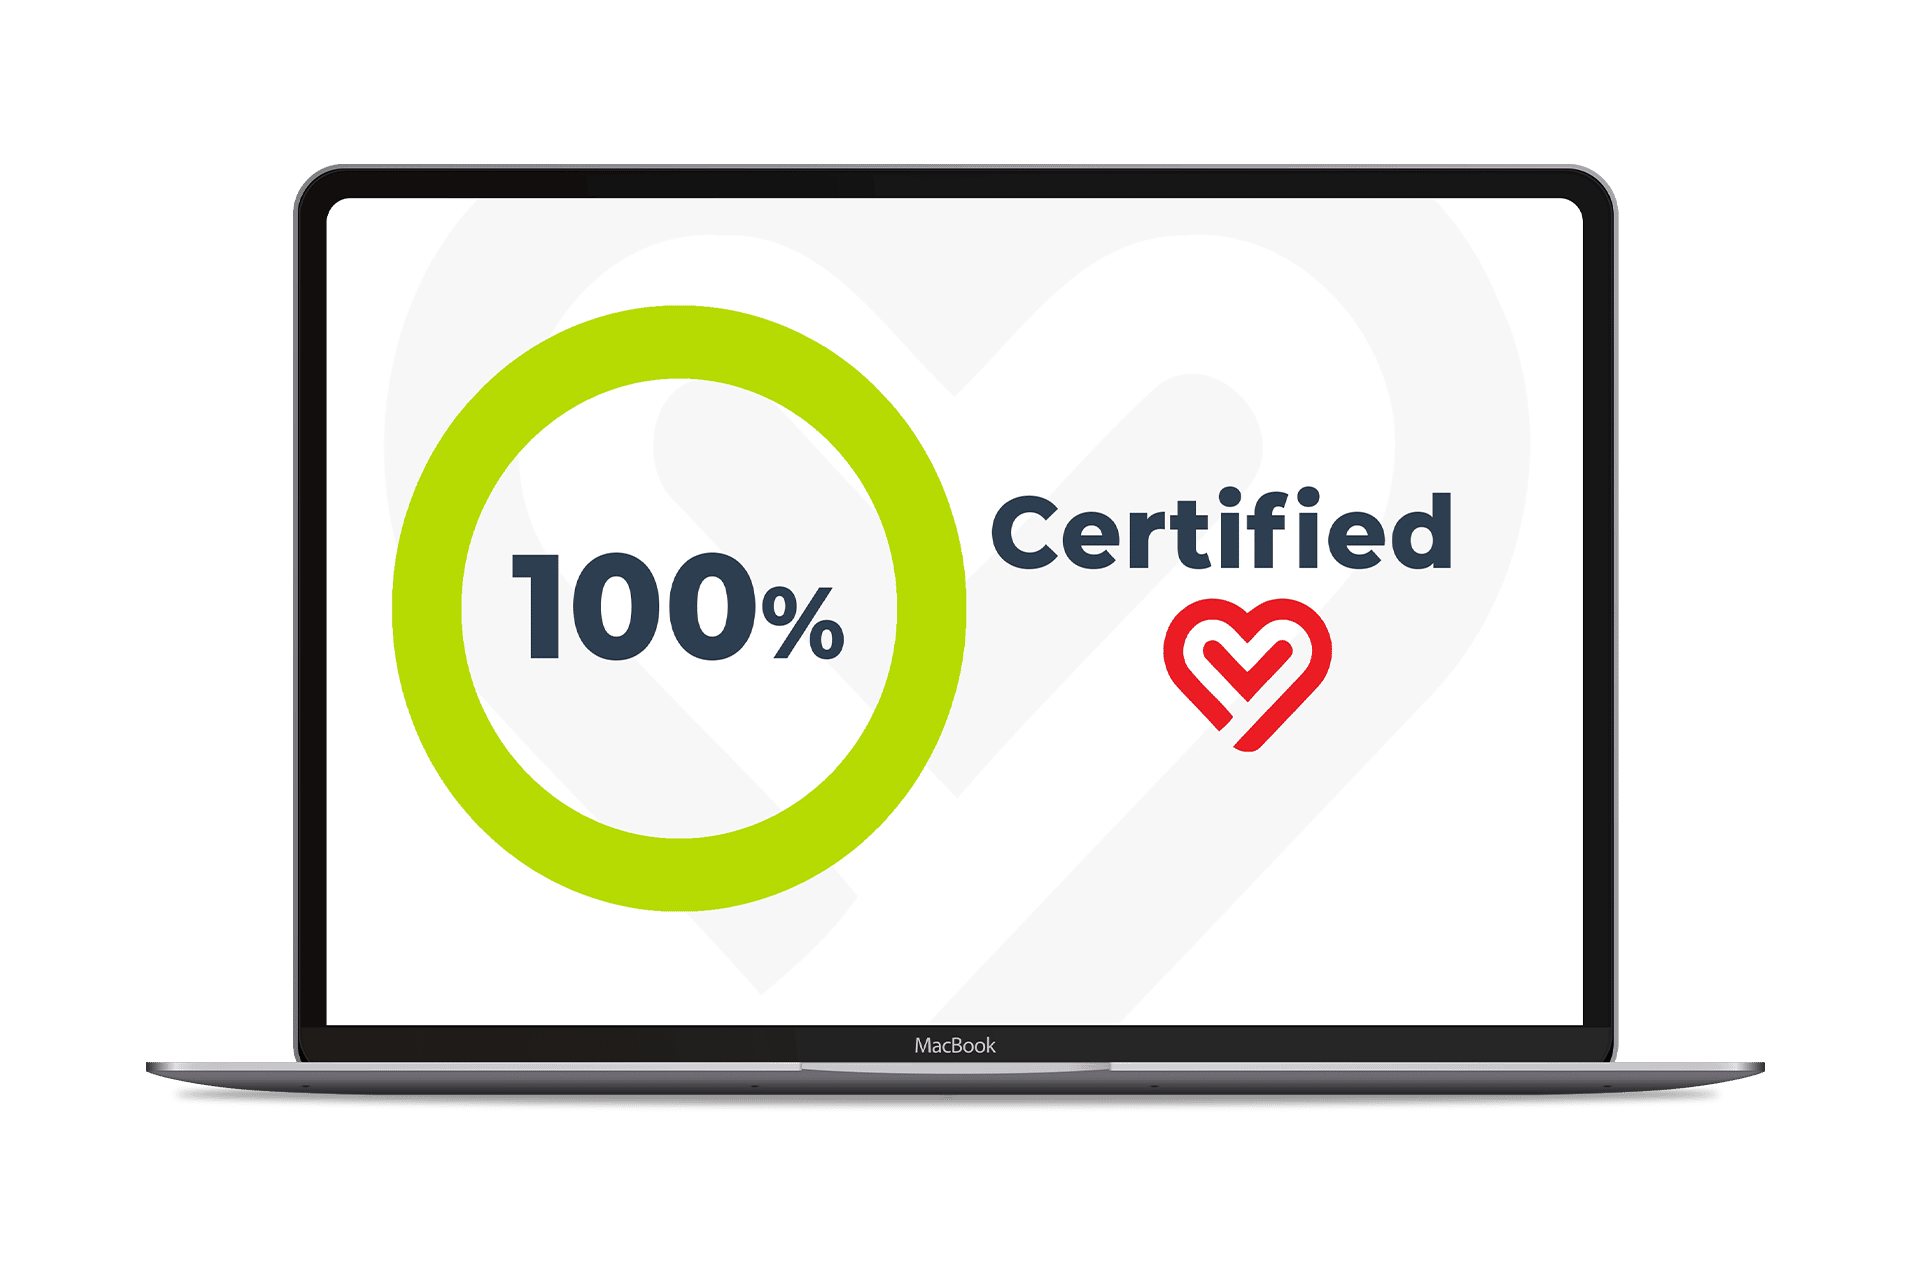 Get Certified Most Loved Workplace®